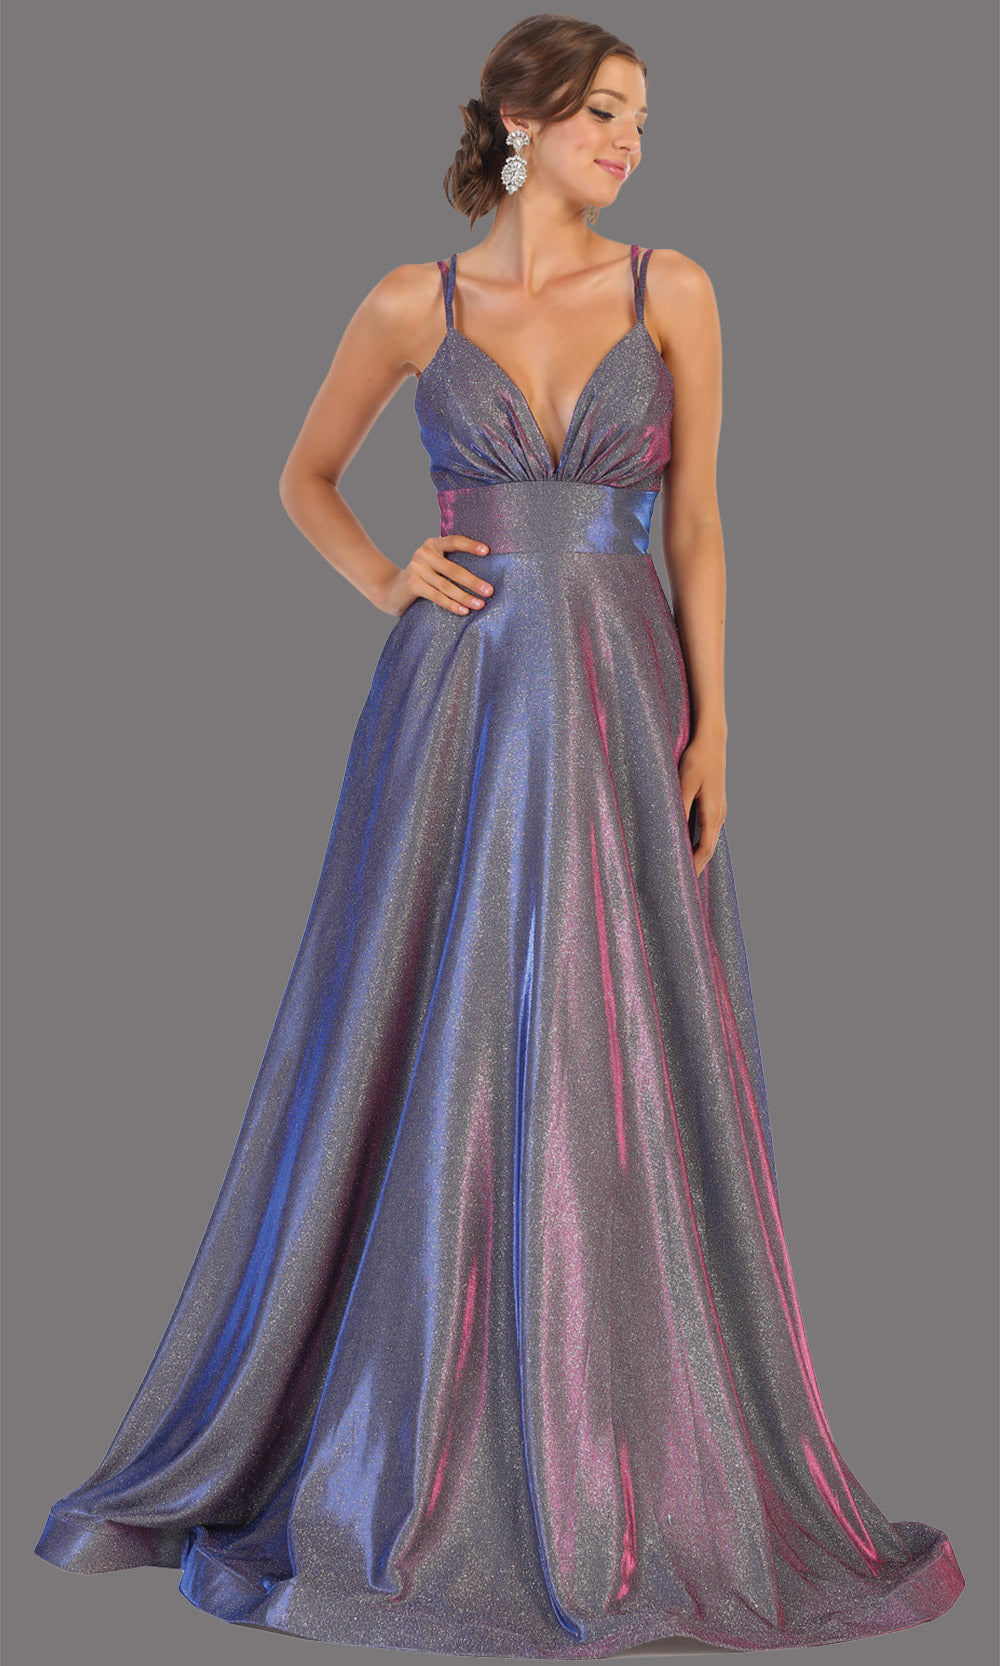 Mayqueen MQ1756 long purple metallic evening flowy dress w/low back & straps. Full length purple gown is perfect for enagagement/e-shoot dress, wedding reception dress, indowestern gown, formal evening party dress, prom. Plus sizes avail